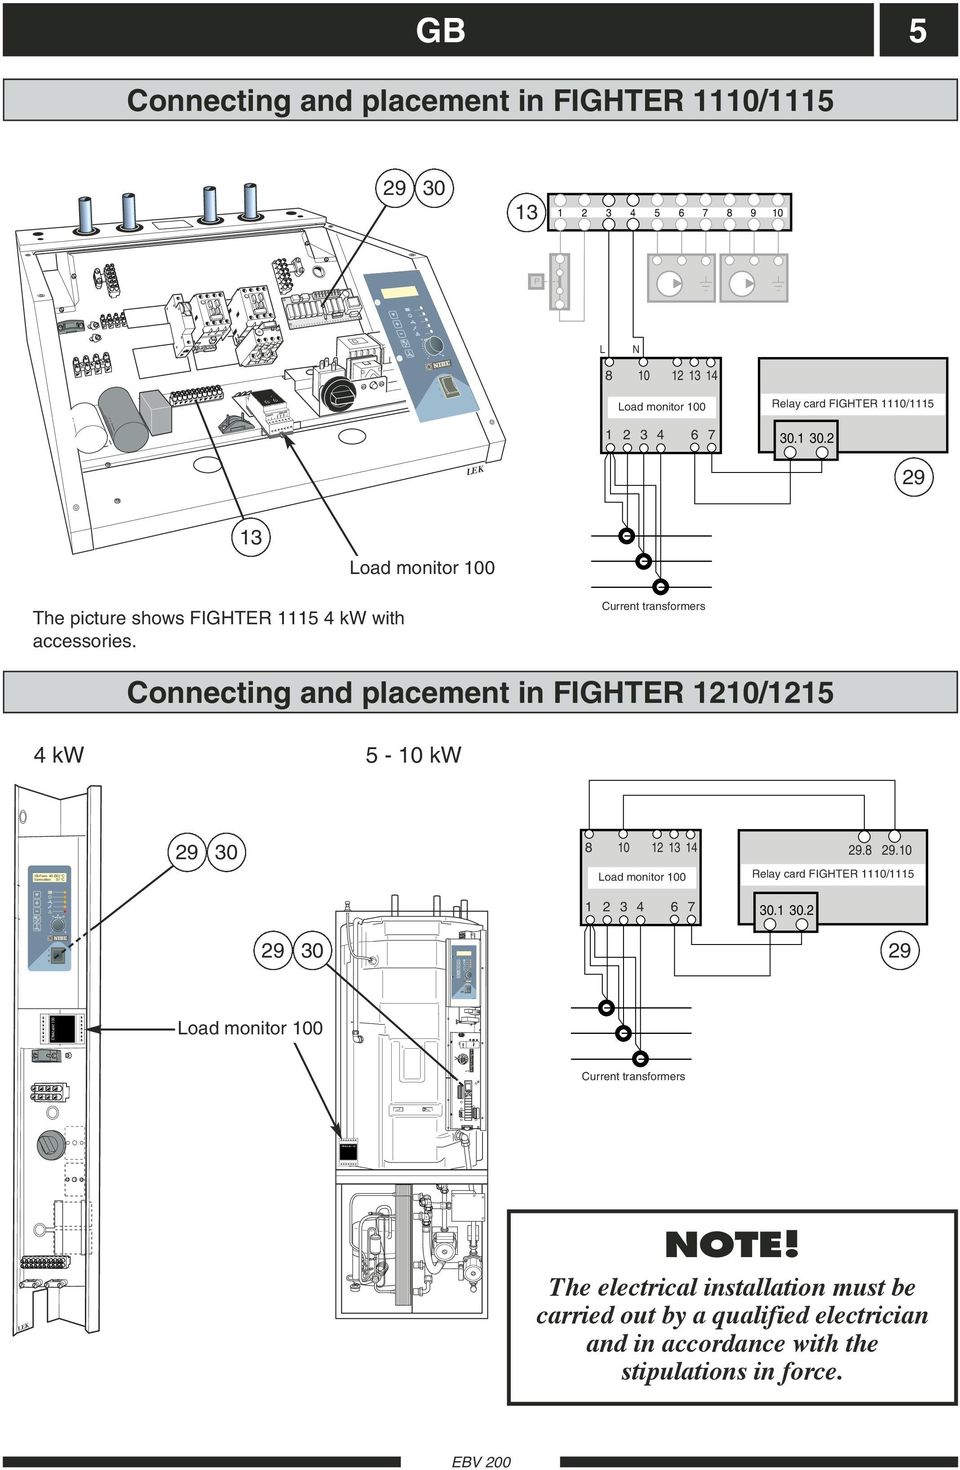 Current transformers Connecting and placement in FIGHTER 1210/1215 4 kw 5-10 kw VB-Fram 49 (50) C Varmvatten 51 C 30 8 